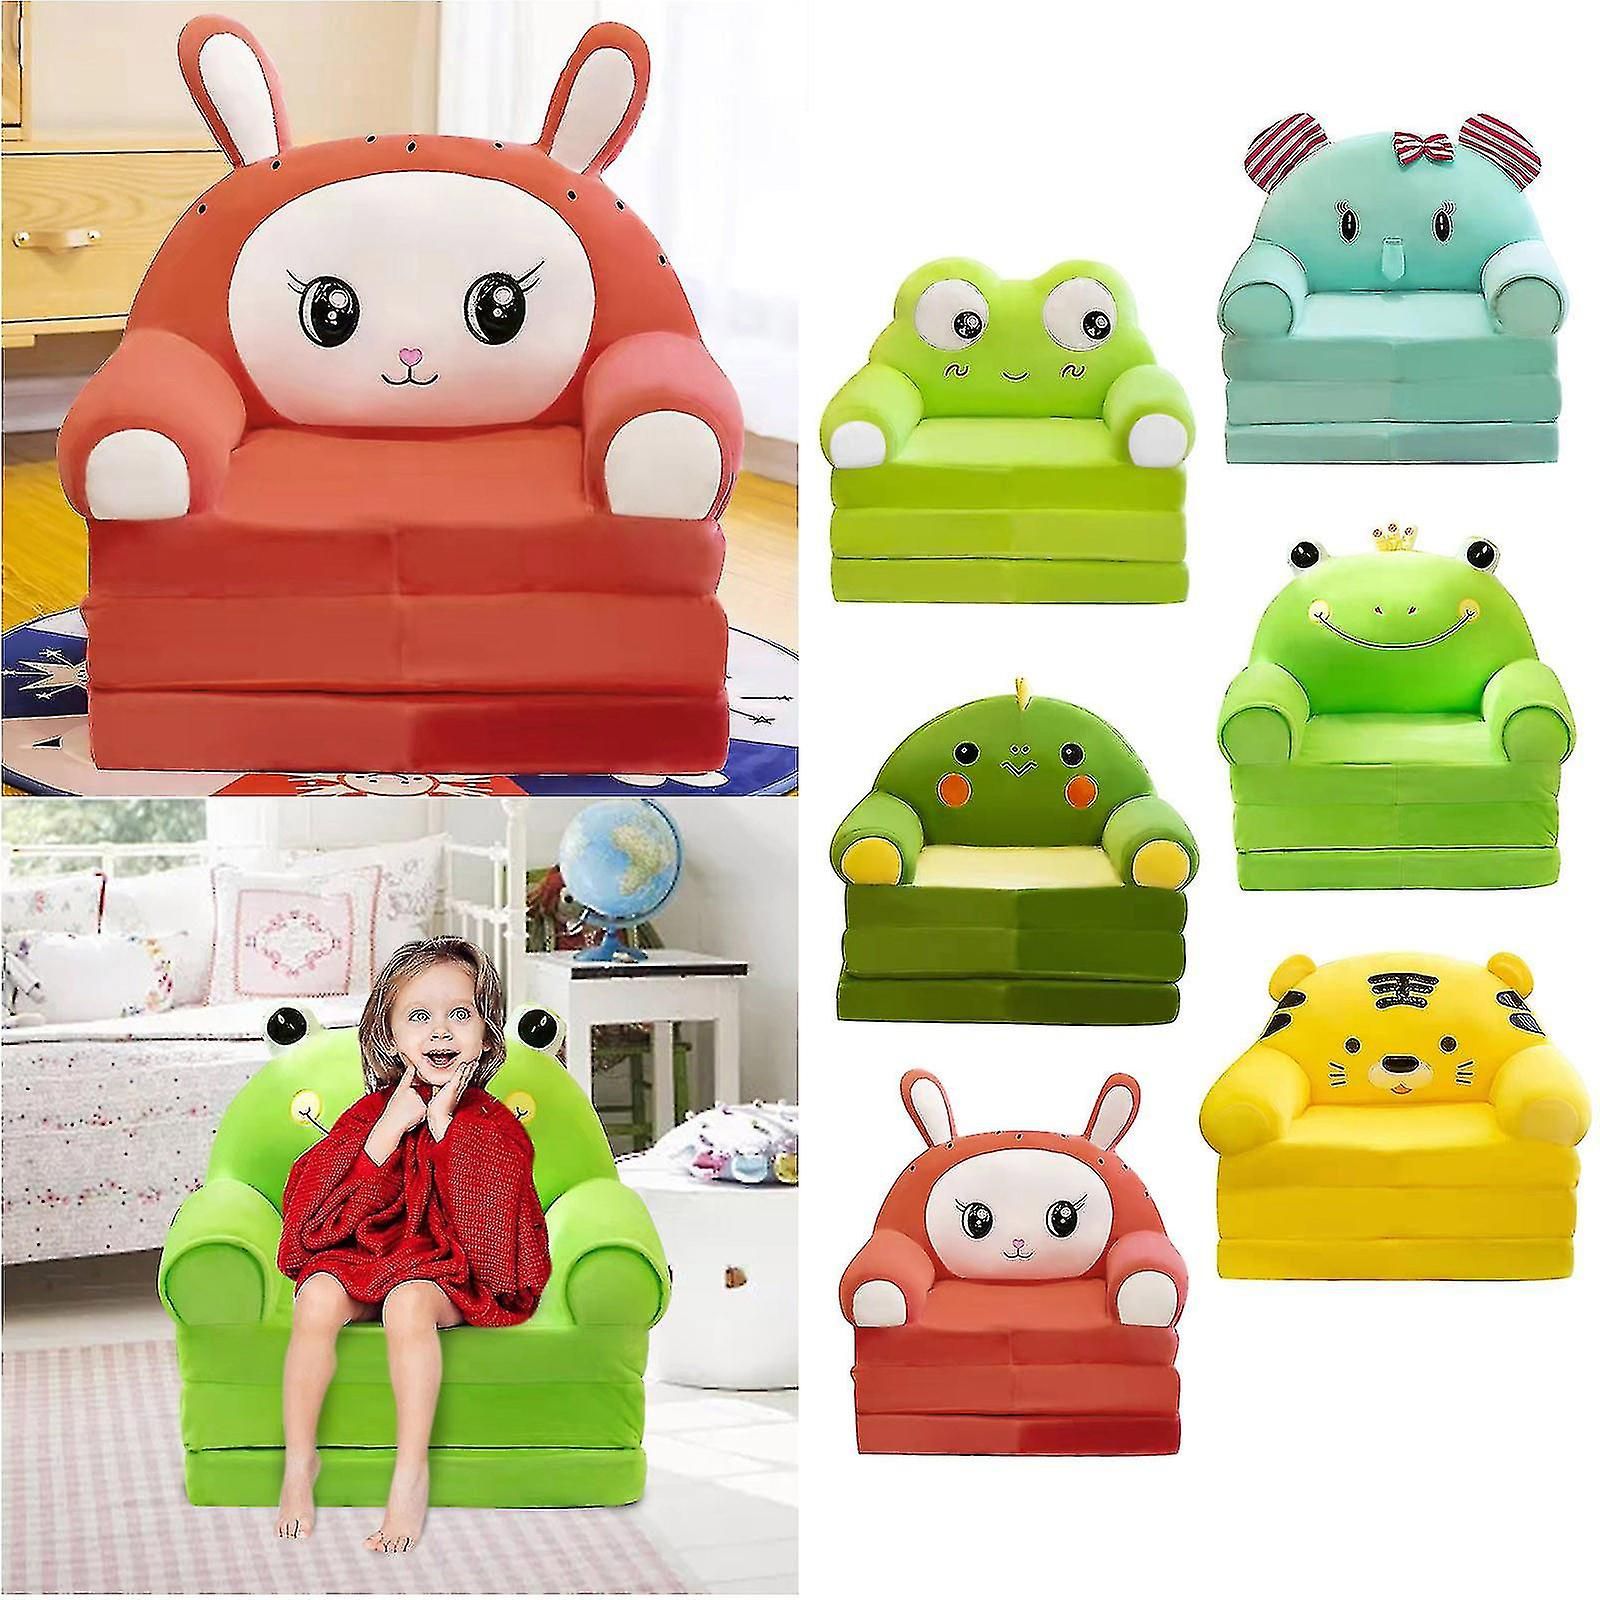 Hot 2023 2 In 1 Plush Foldable Kids Sofa Backrest Armchair Foldable  Children Sofa Cute Best Seller | Fruugo No Throughout 2 In 1 Foldable Sofas (View 10 of 15)